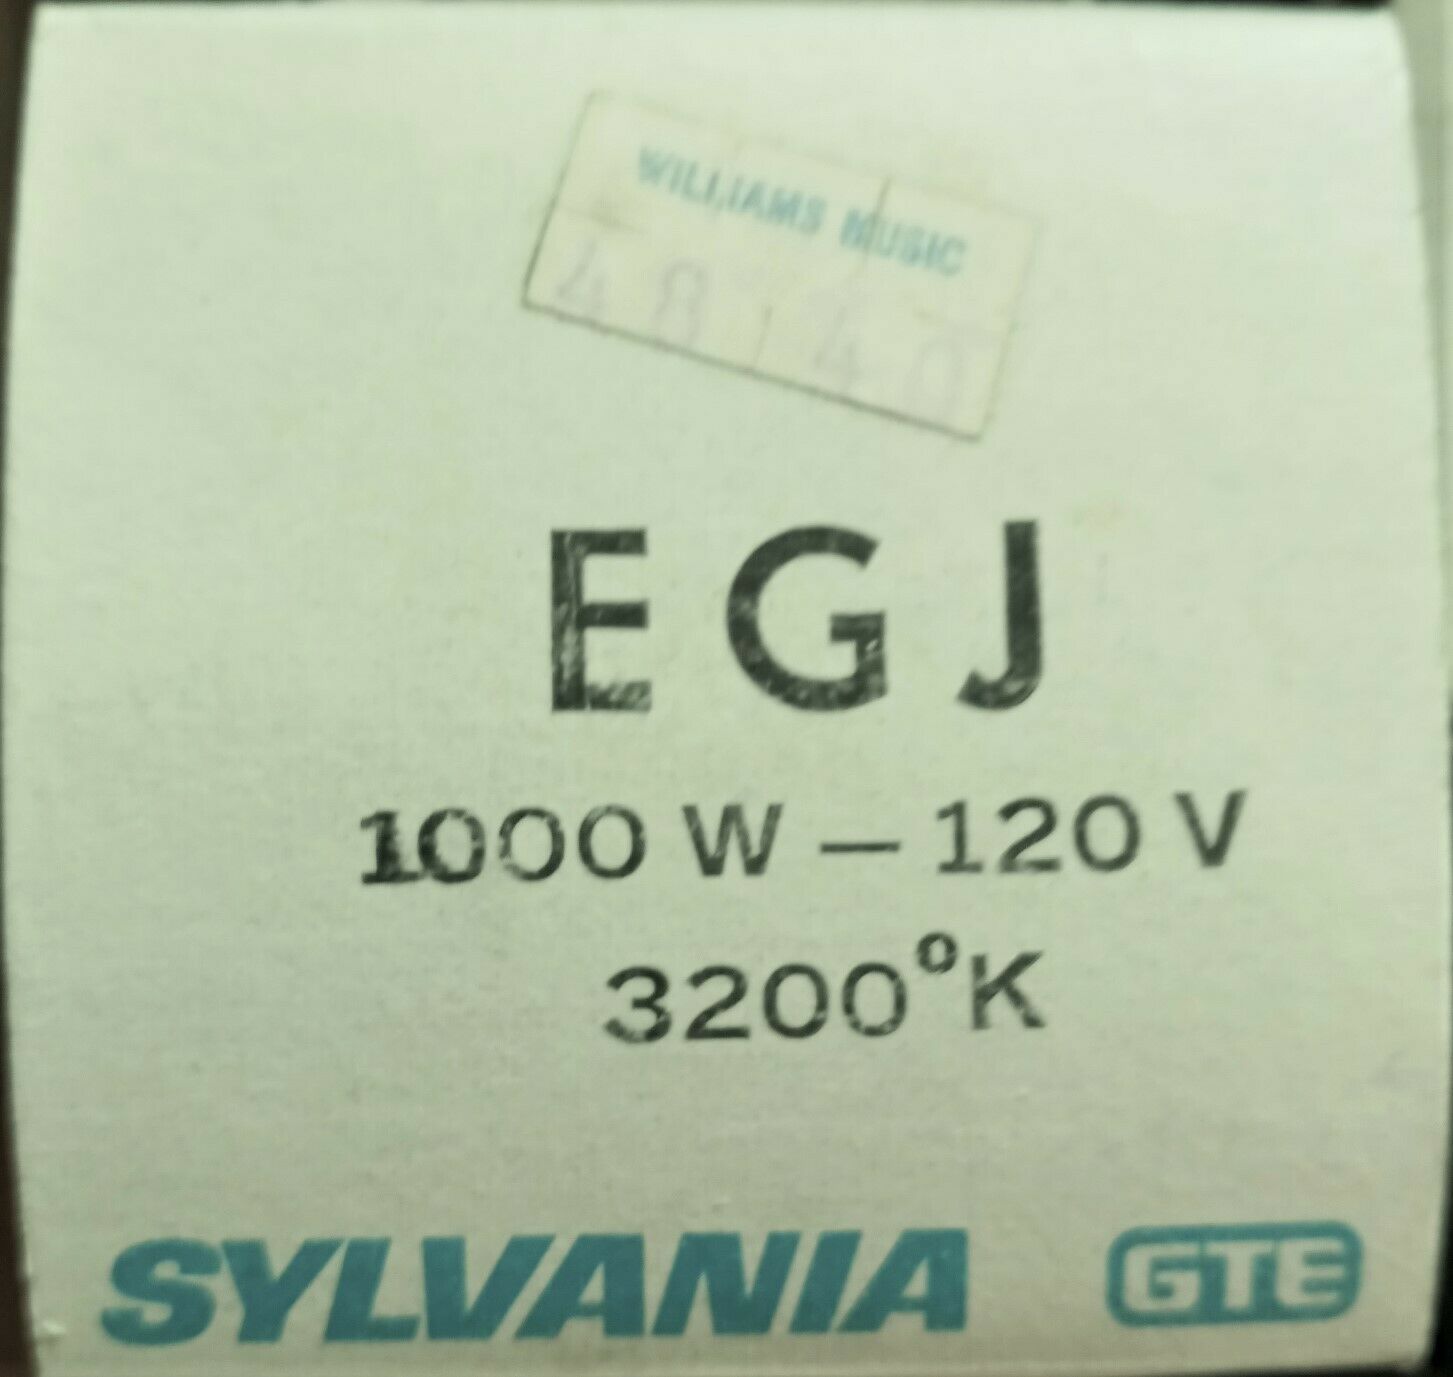 Sylvania Stage Lamp - Egj 1000w - Never Used, In The Box